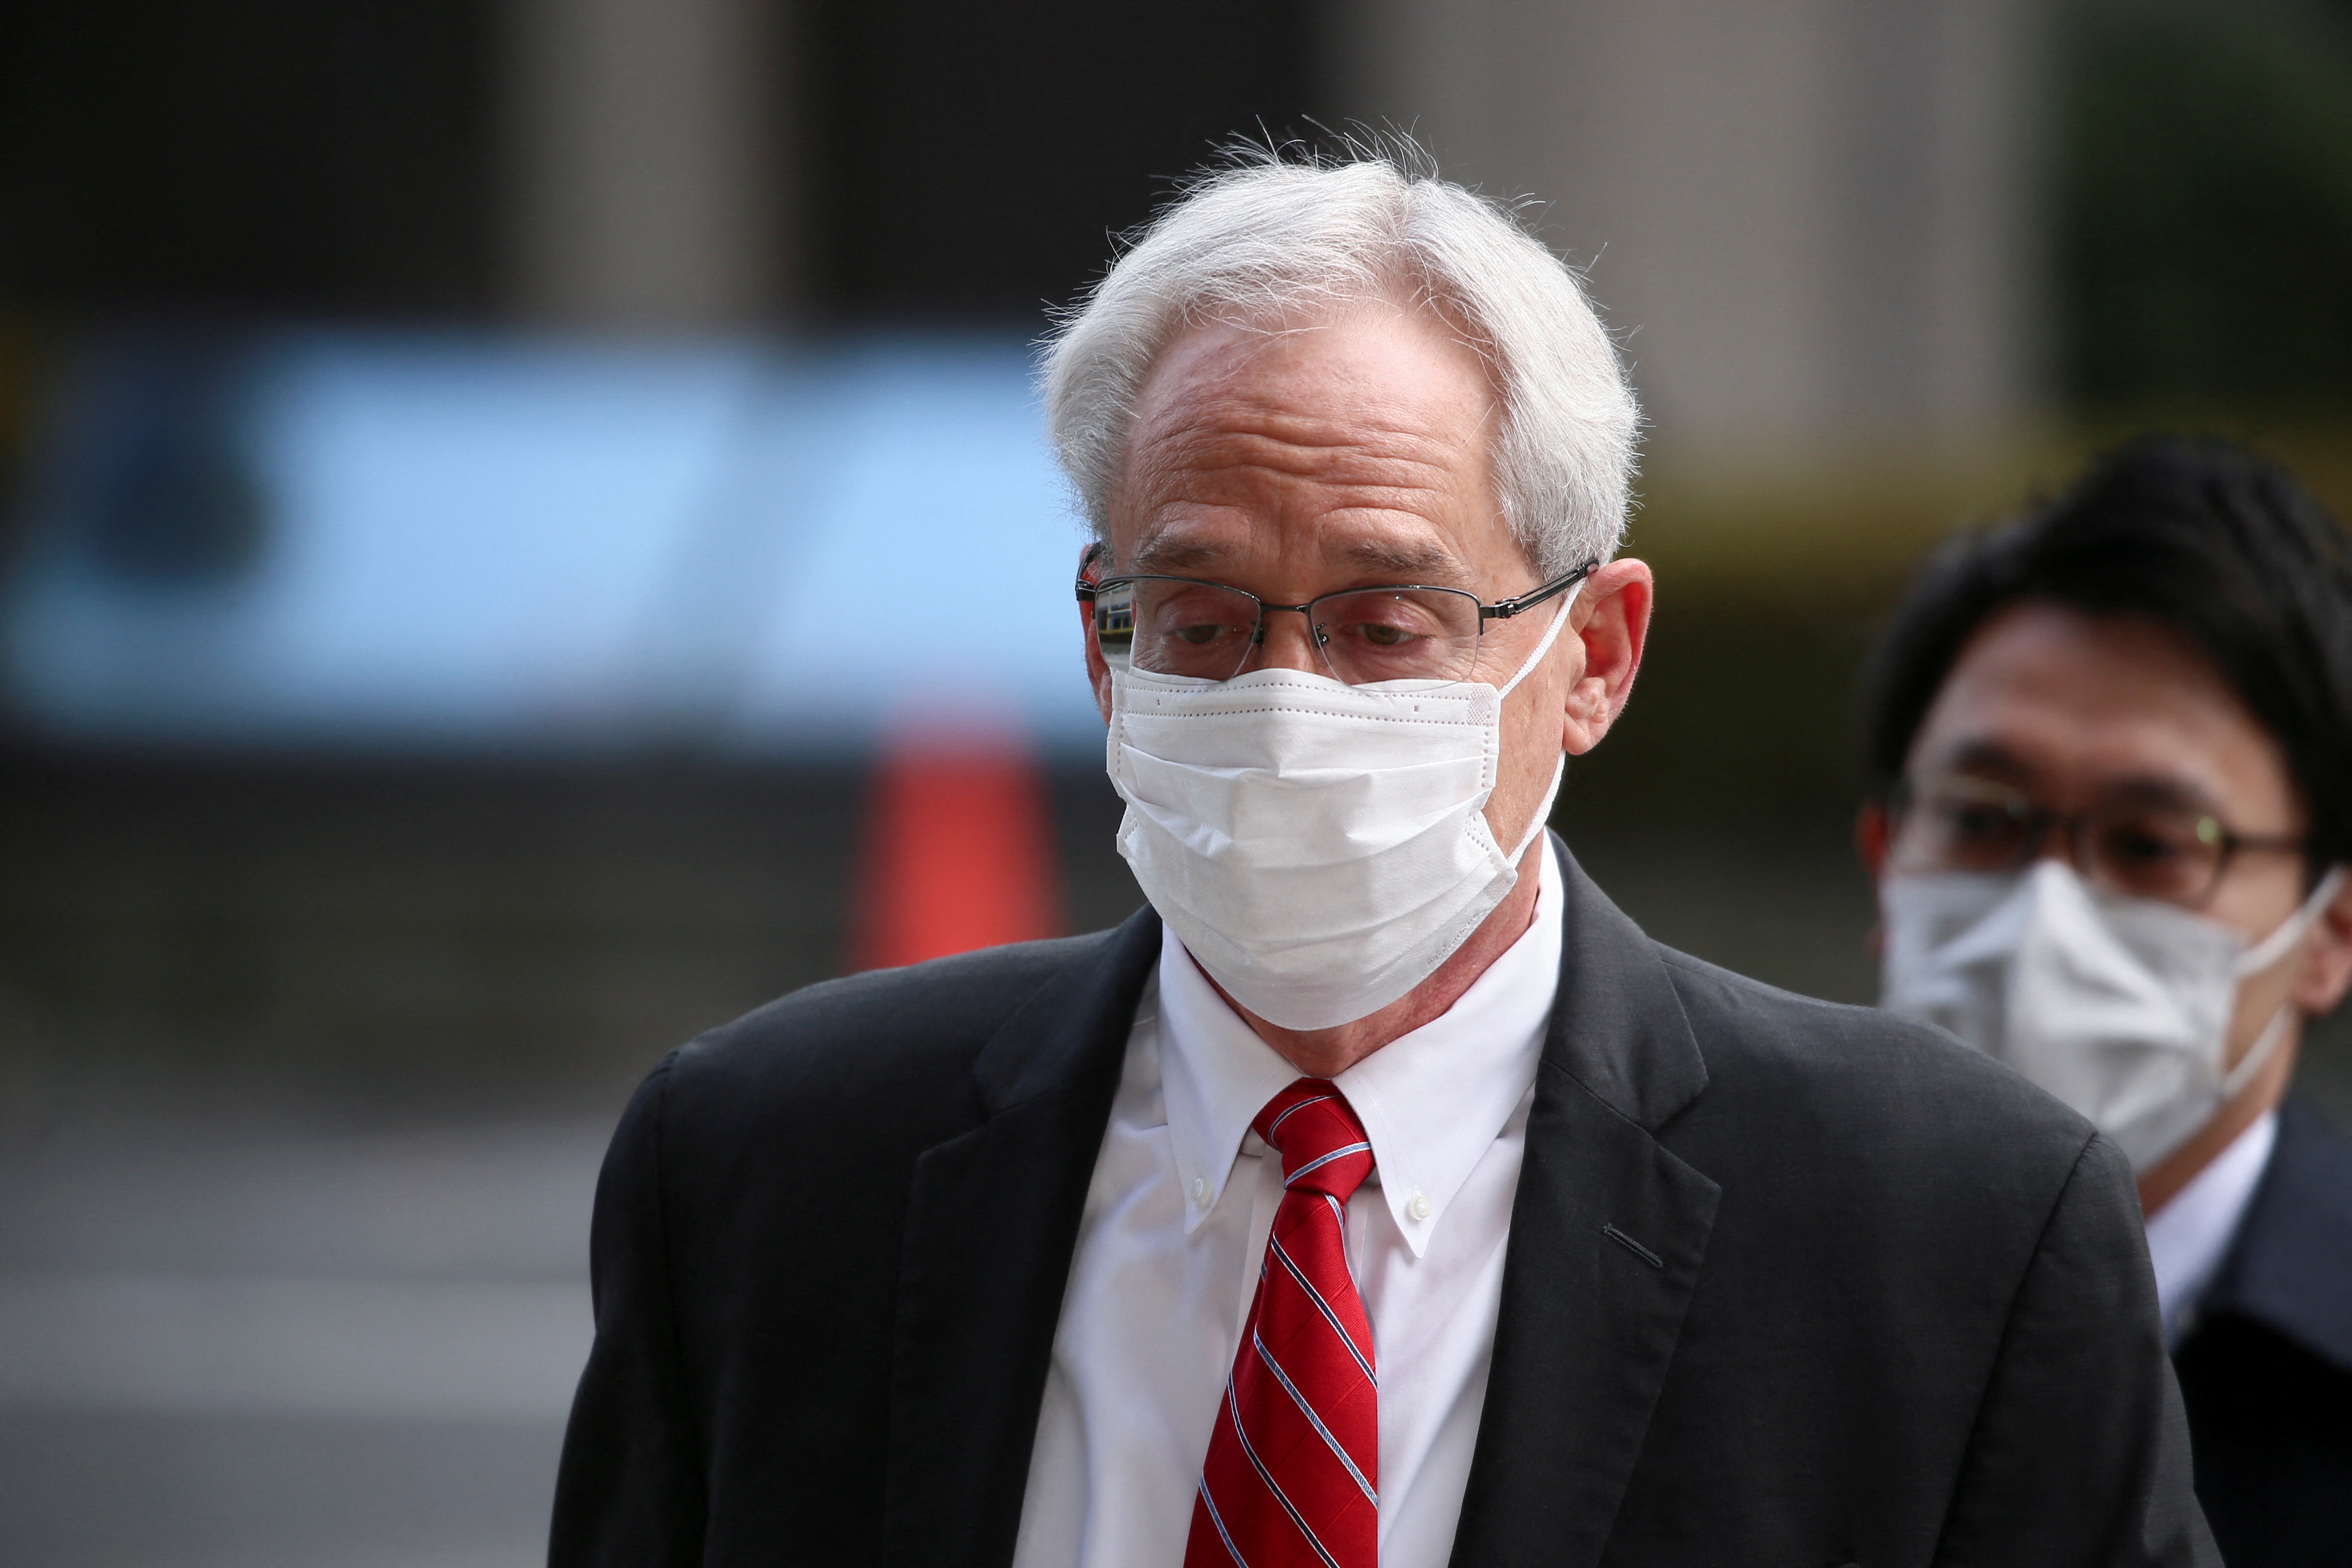 Greg Kelly, former executive of Nissan Motor Co., walks in to the Tokyo District Court